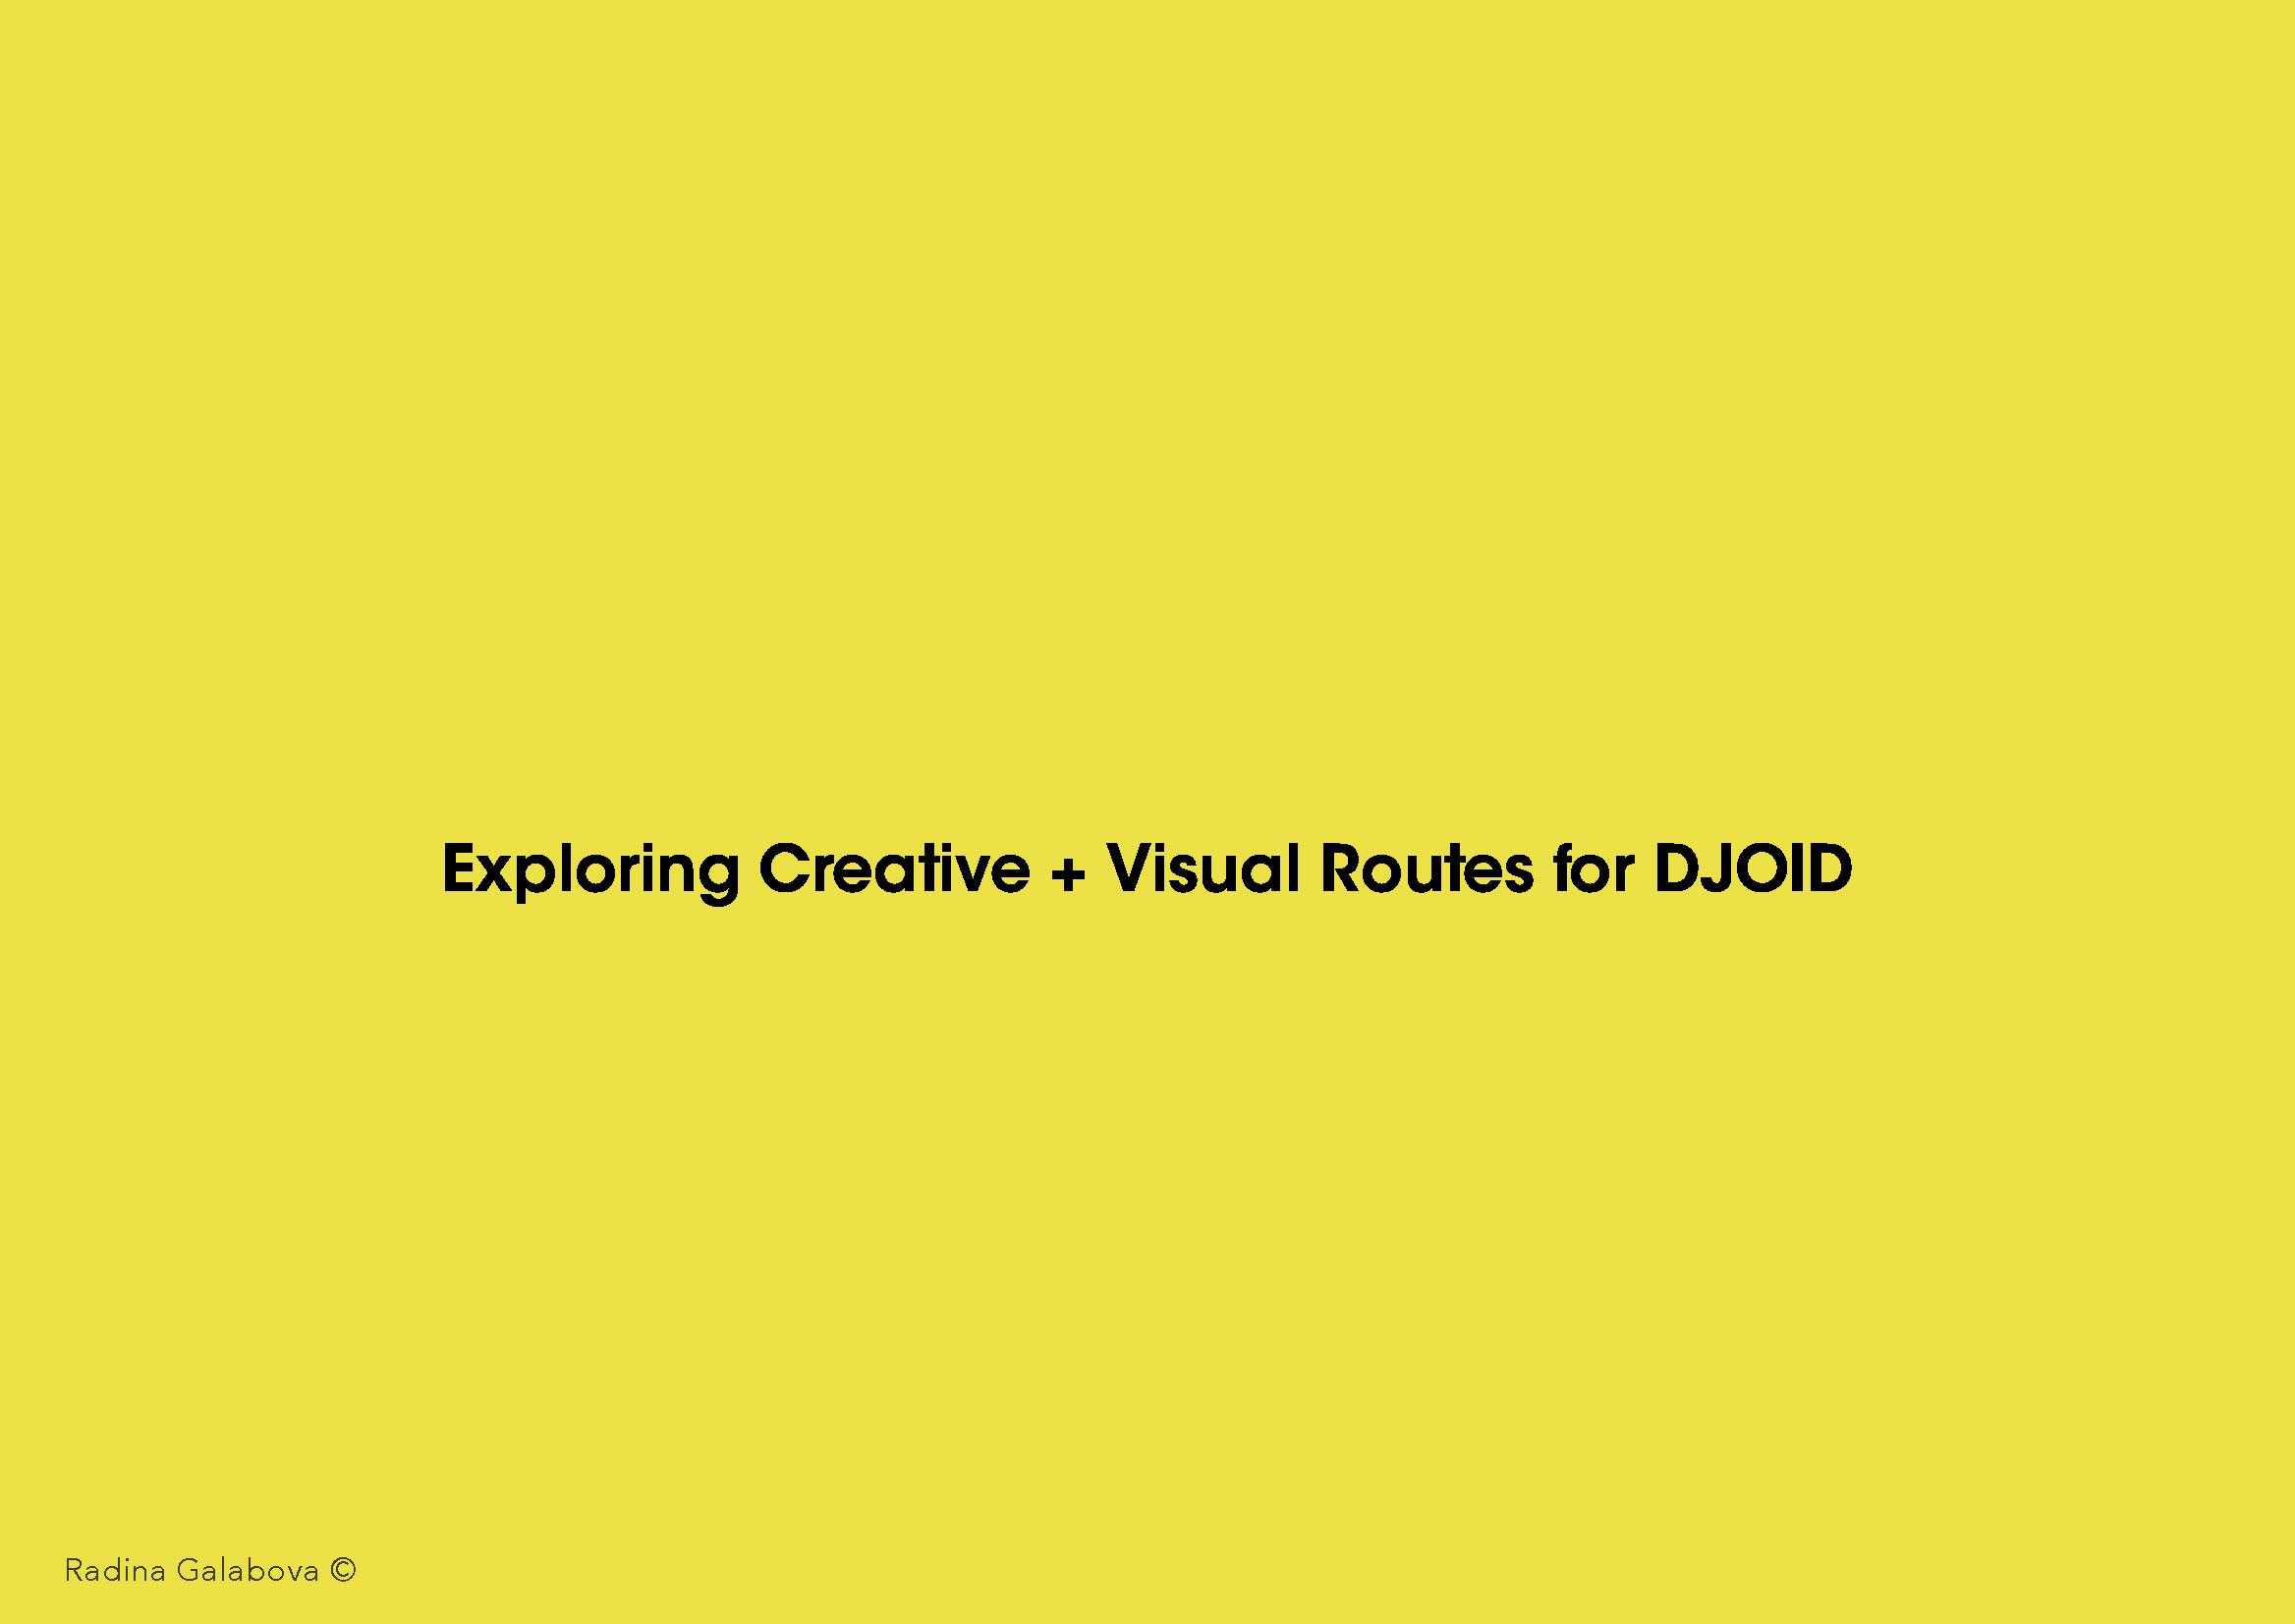 DJOID Routes slides_Page_01.jpg